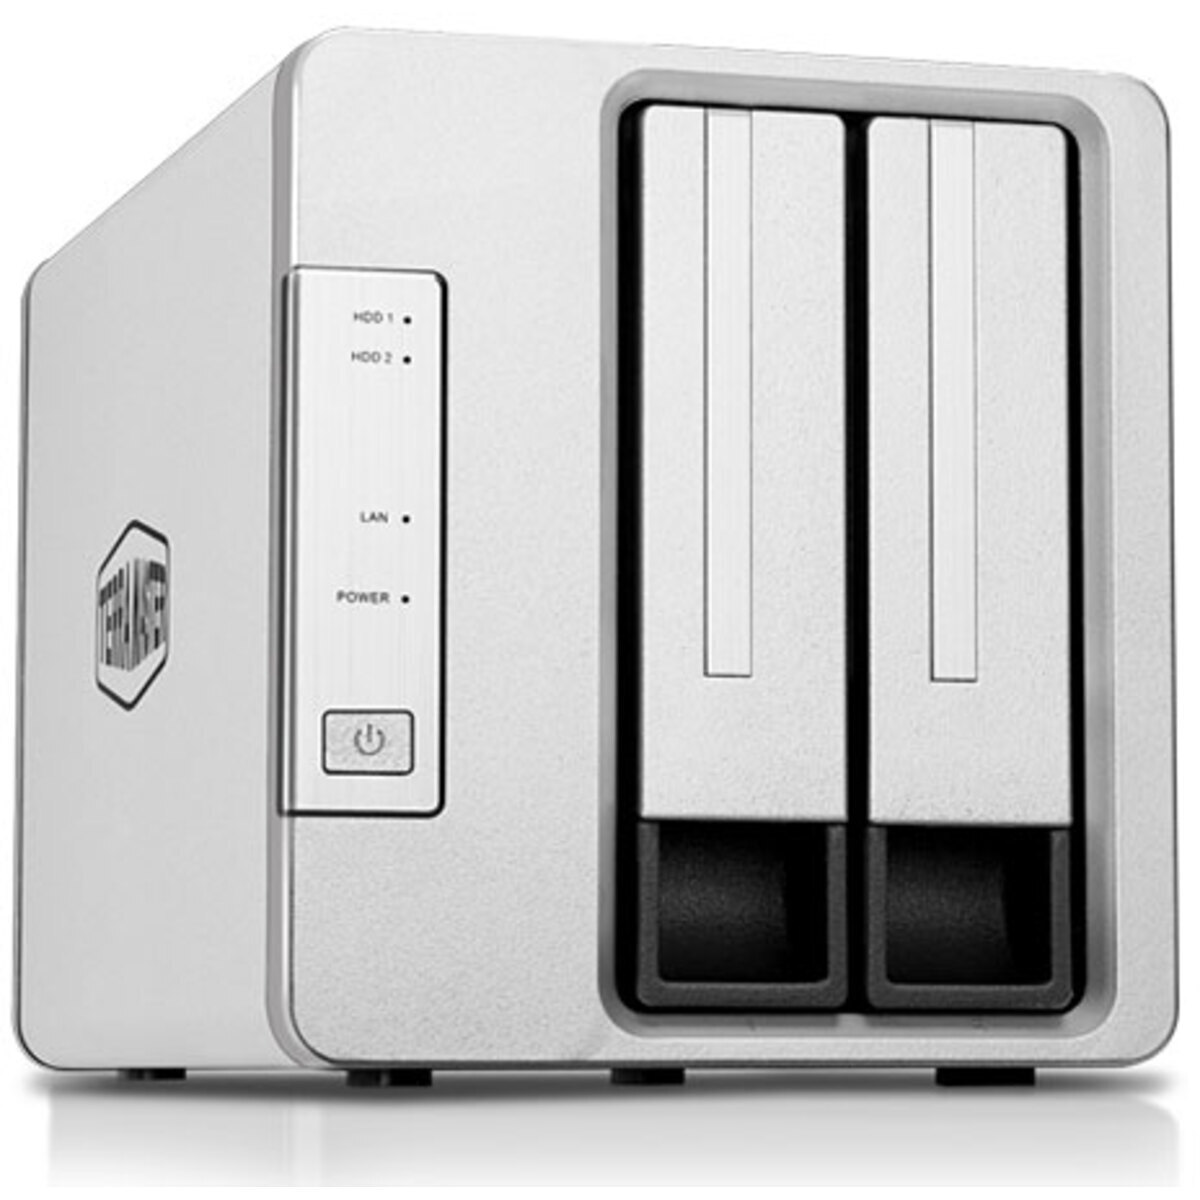 TerraMaster F2-223 6tb 2-Bay Desktop Personal / Basic Home / Small Office NAS - Network Attached Storage Device 1x6tb Seagate IronWolf Pro ST6000NT001 3.5 7200rpm SATA 6Gb/s HDD NAS Class Drives Installed - Burn-In Tested - FREE RAM UPGRADE F2-223